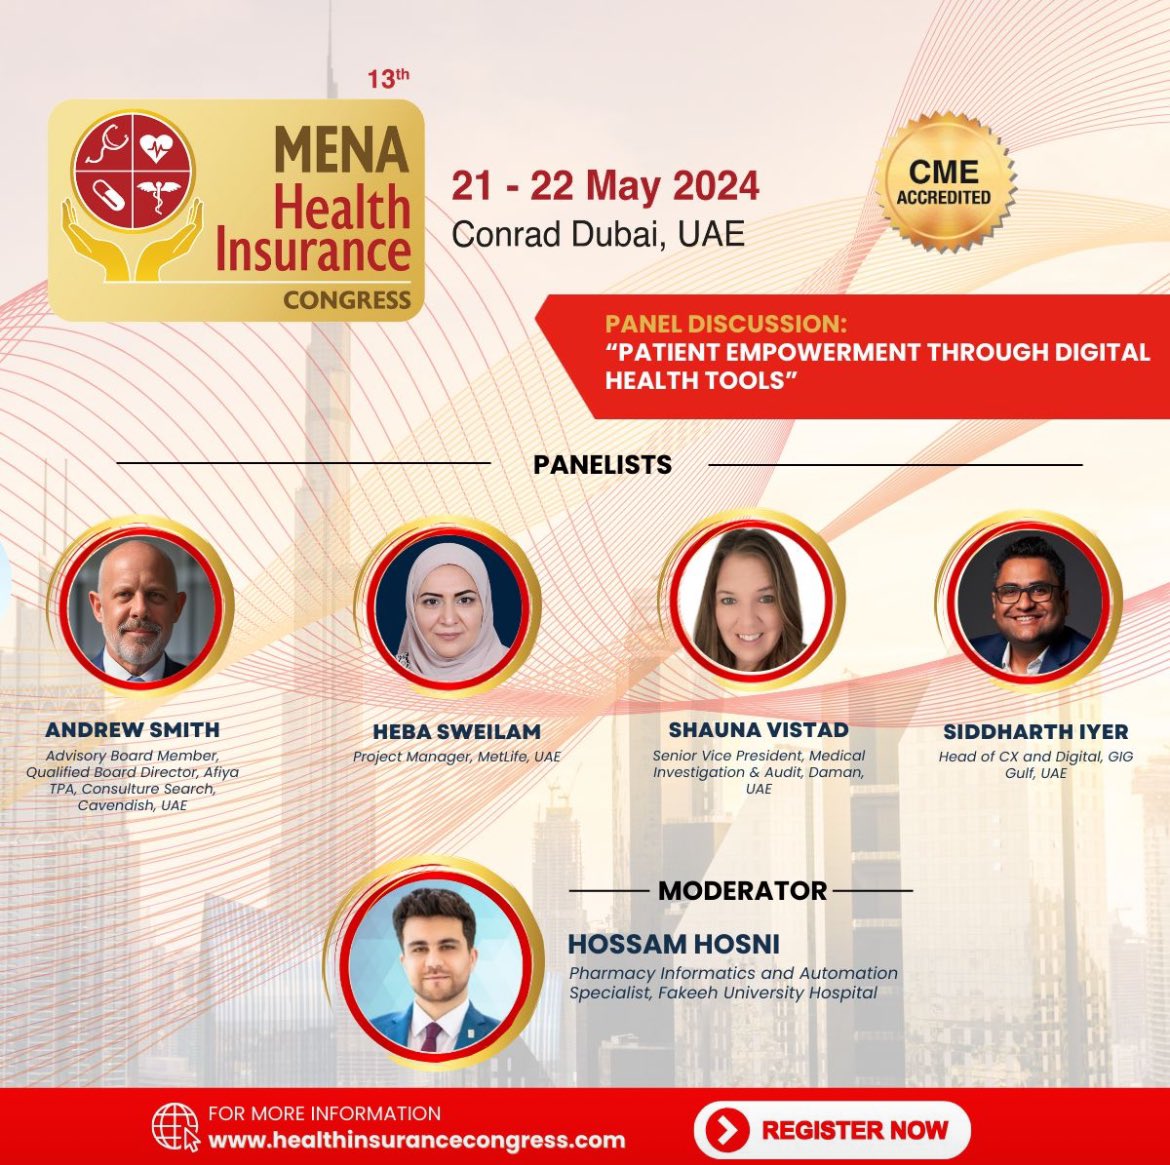 Join me at the 13th MENA Health Congress, Dubai, 21-22 May 2024. We'll explore healthcare transformation, focusing on Medical Insurance Providers and digital tools for personalizing patient journeys. Excited to contribute to the Patient Empowerment panel. 

#DigitalEmpowerment…